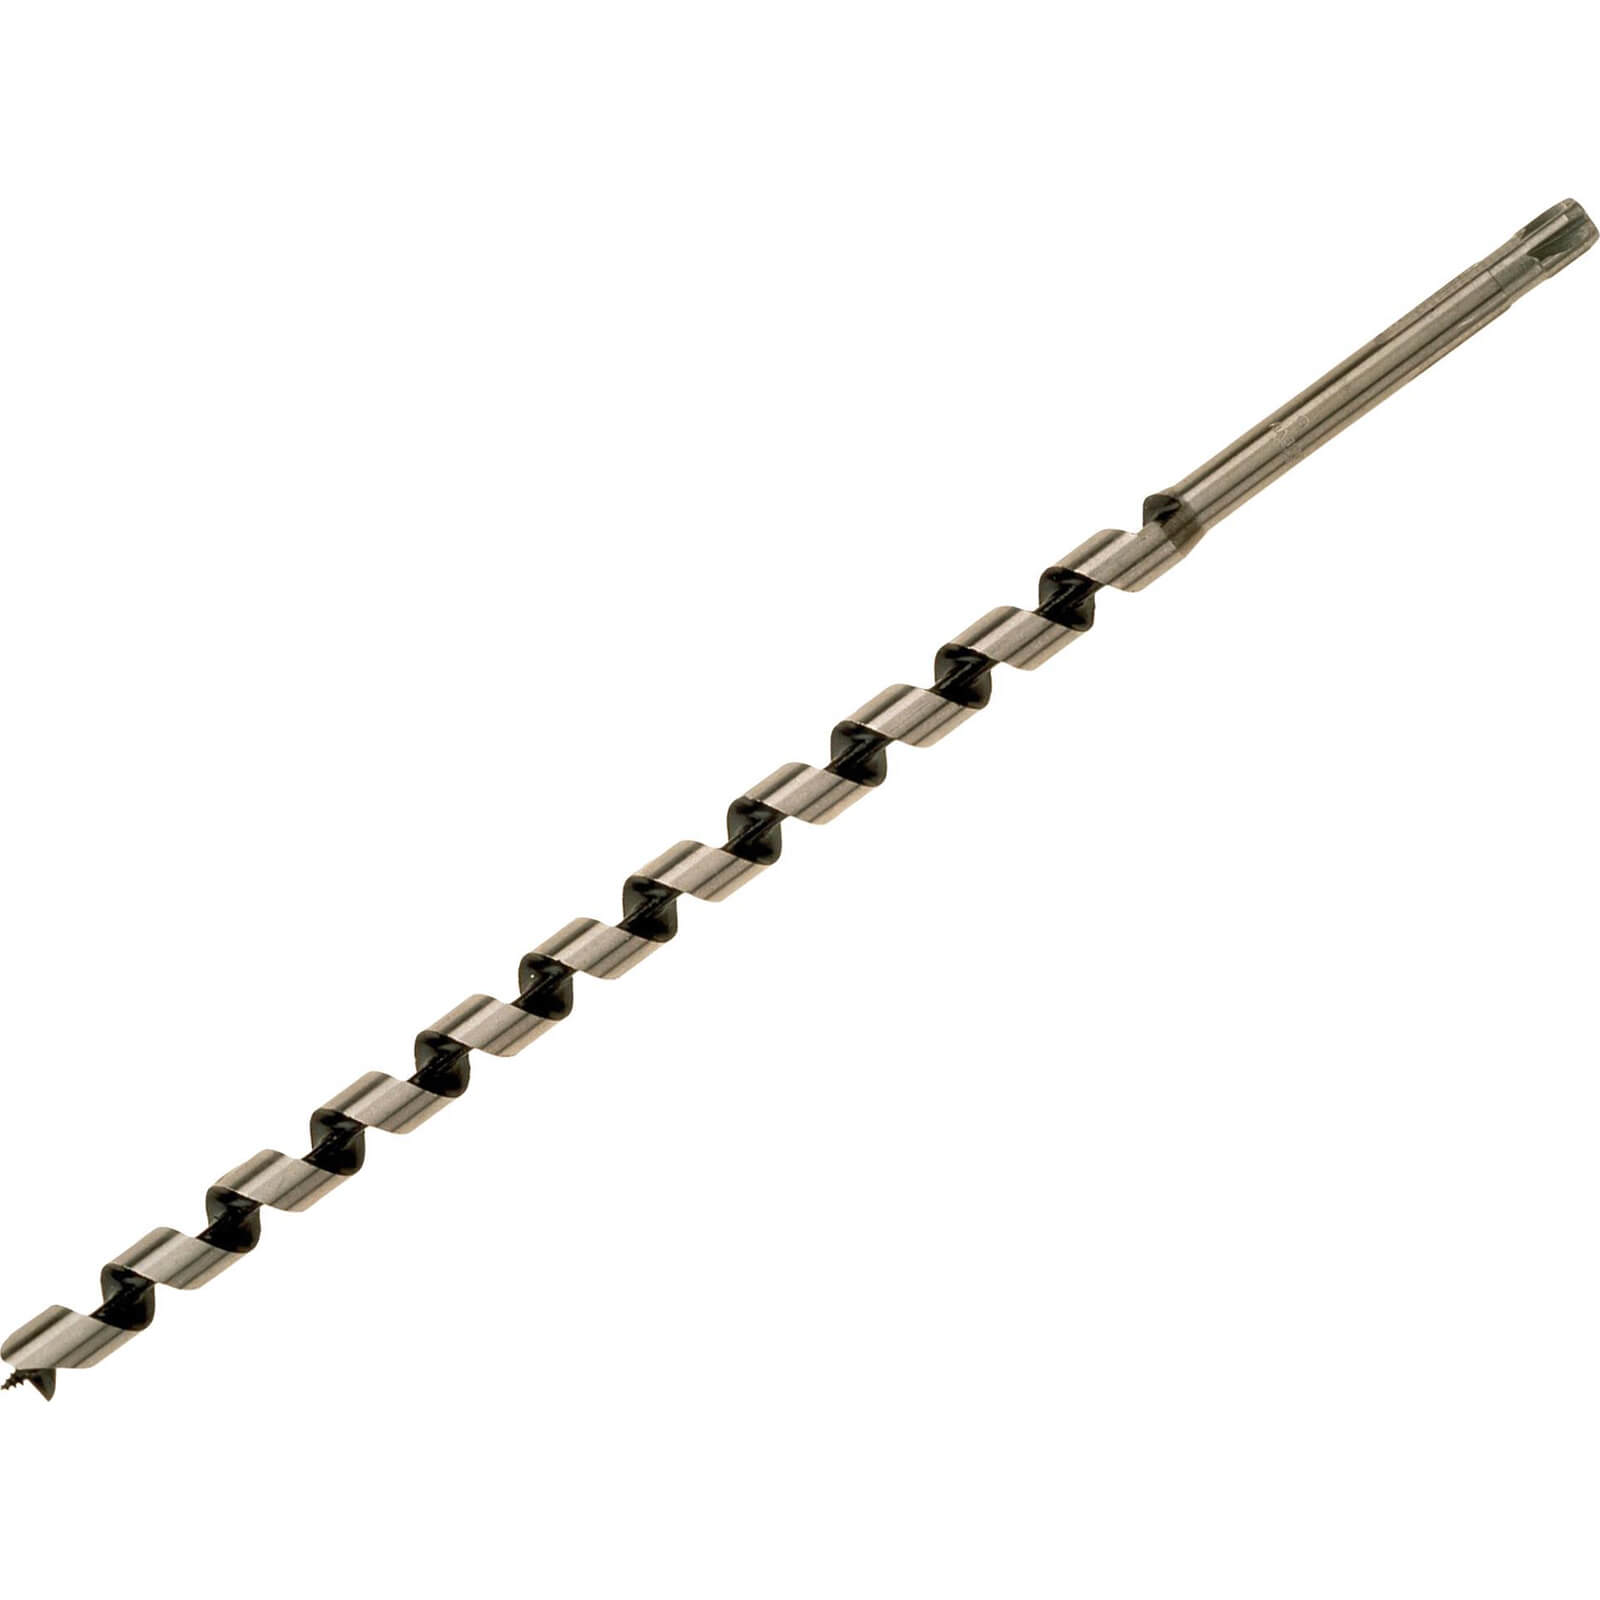 Photo of Bahco 9627 Series Long Combination Auger Drill Bit 32mm 460mm